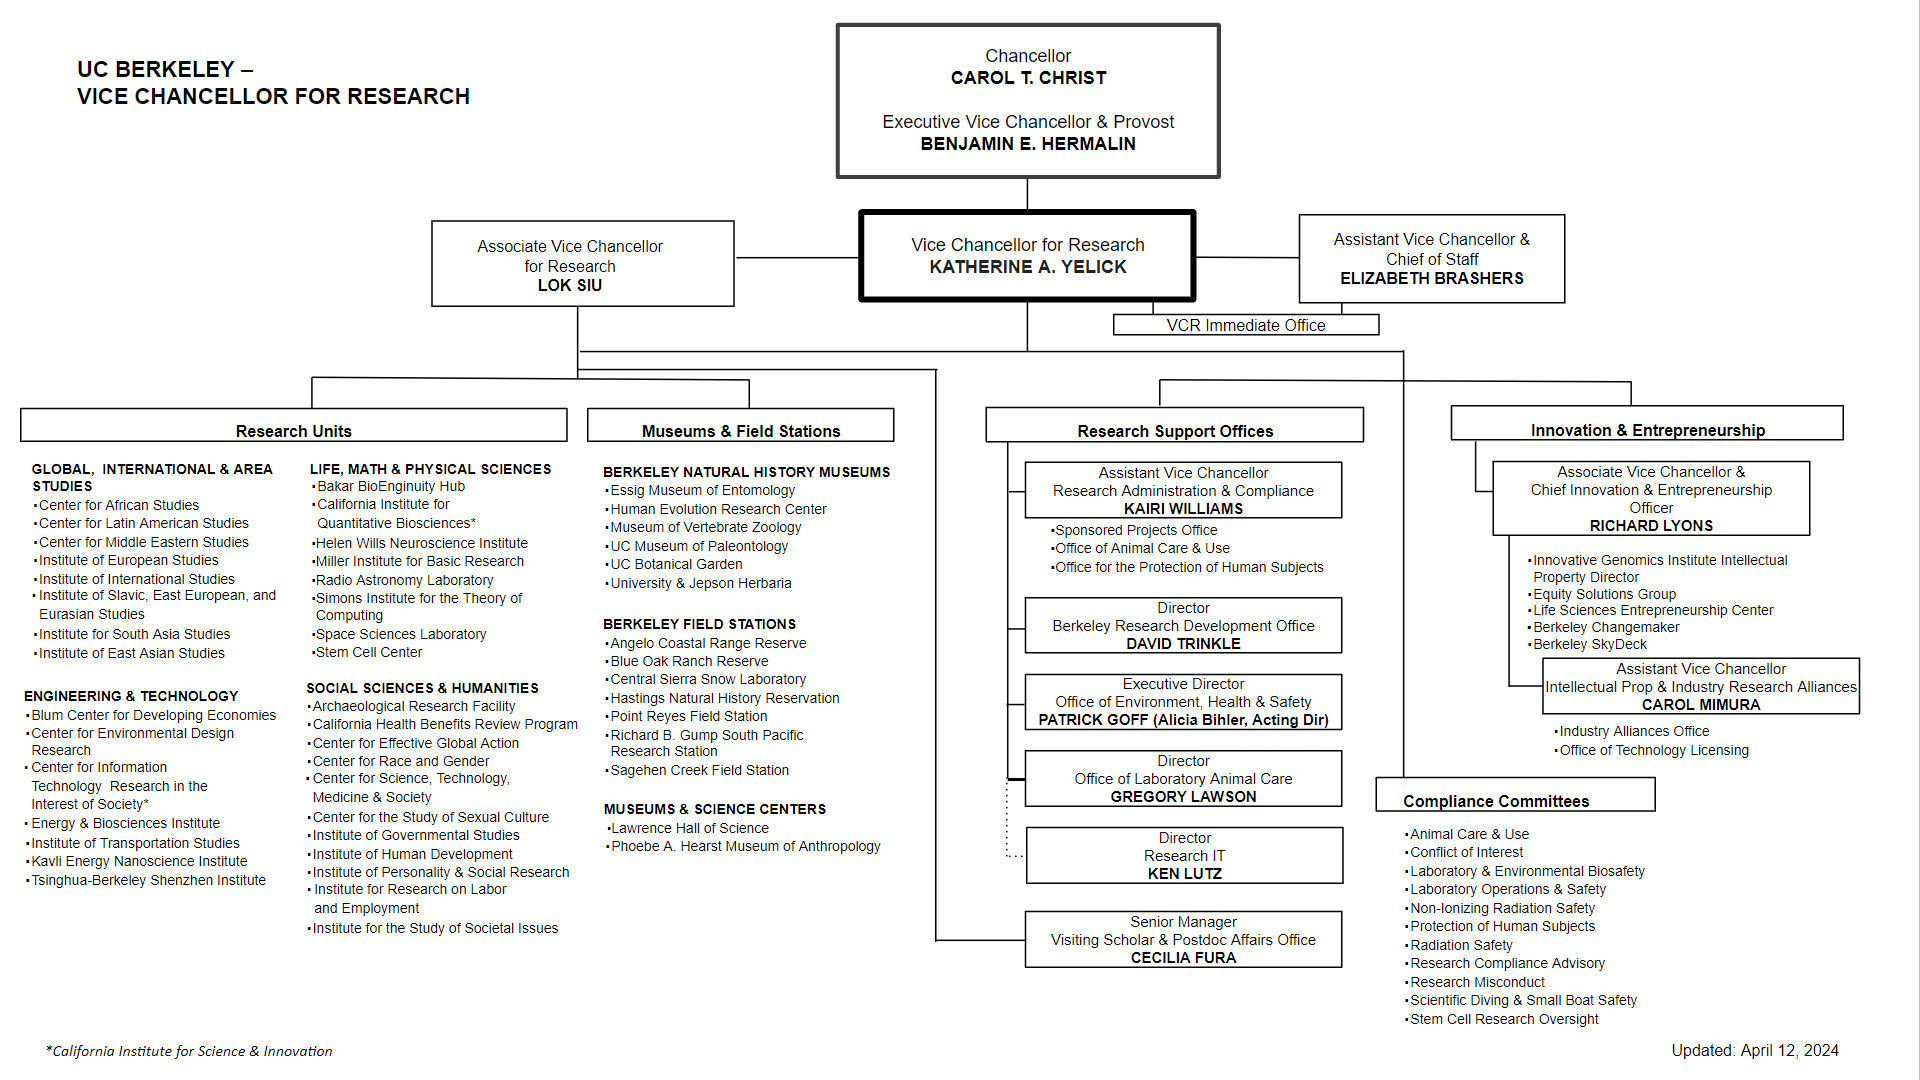 VCRO Organization chart. Click link below for accessible version